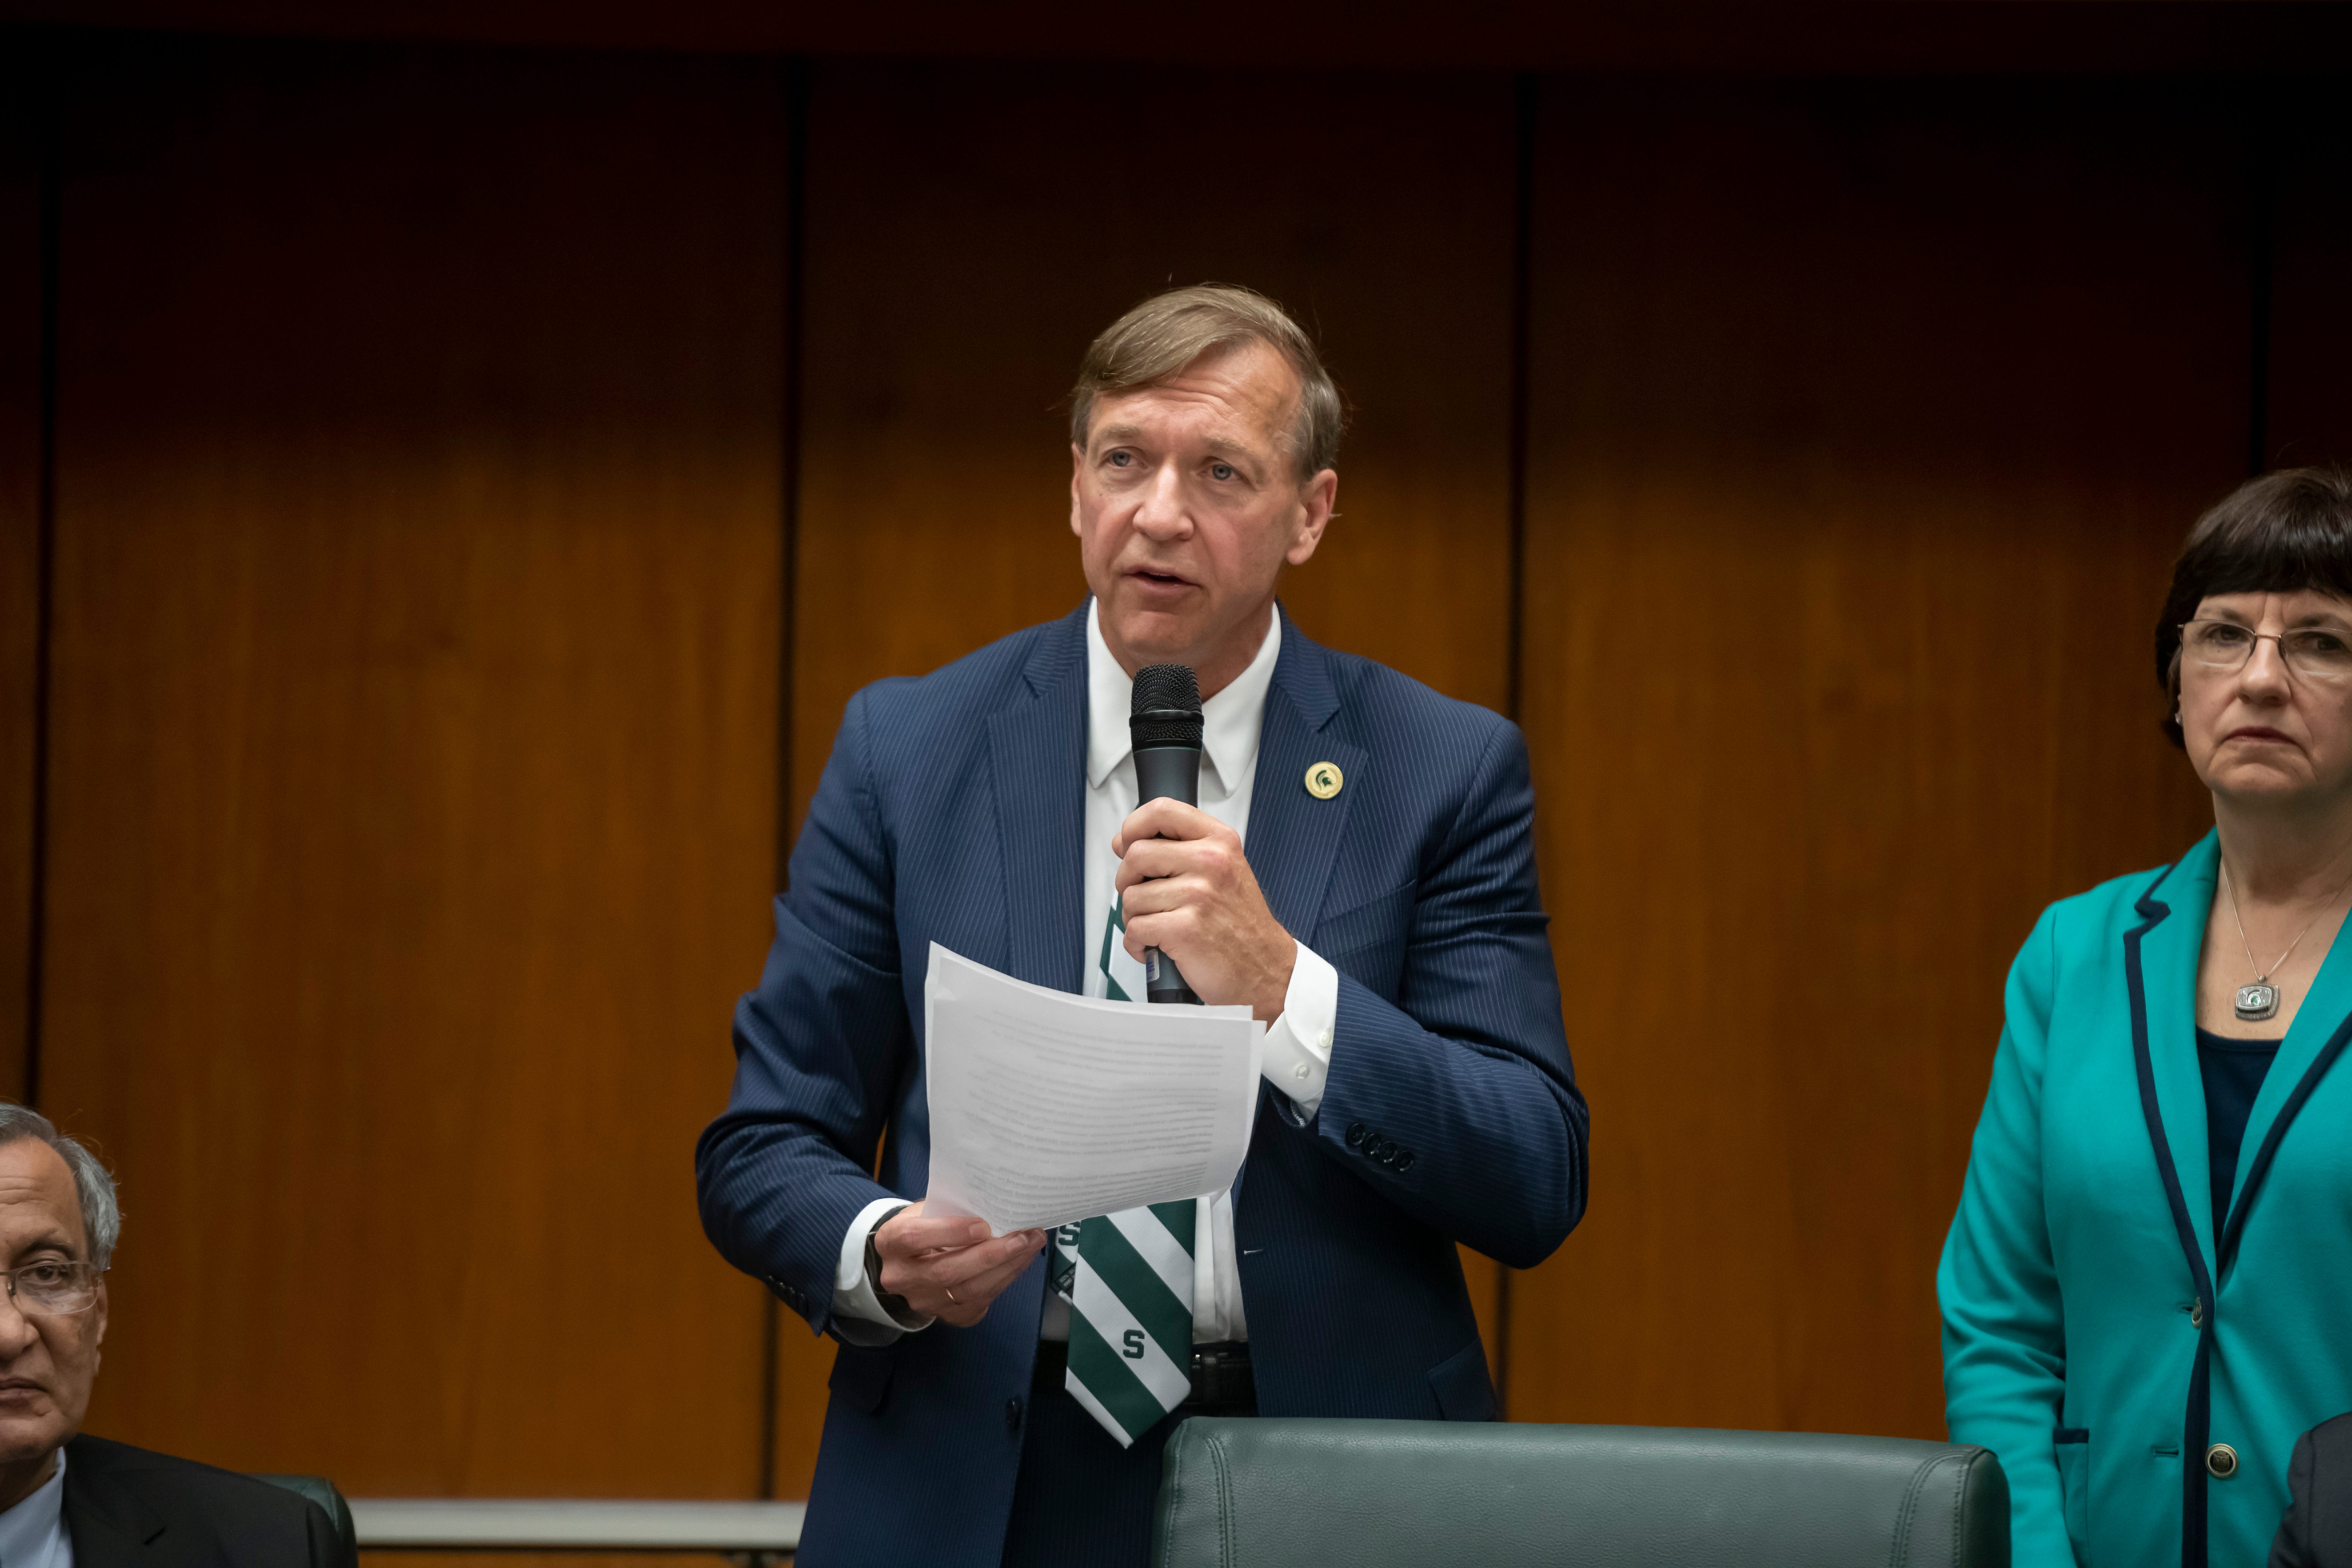 Samuel Stanley Jr. speaks to the audience after a special session of the Michigan State University board of trustees voted to elect Stanley as the university's 21st president, May 28, 2019.